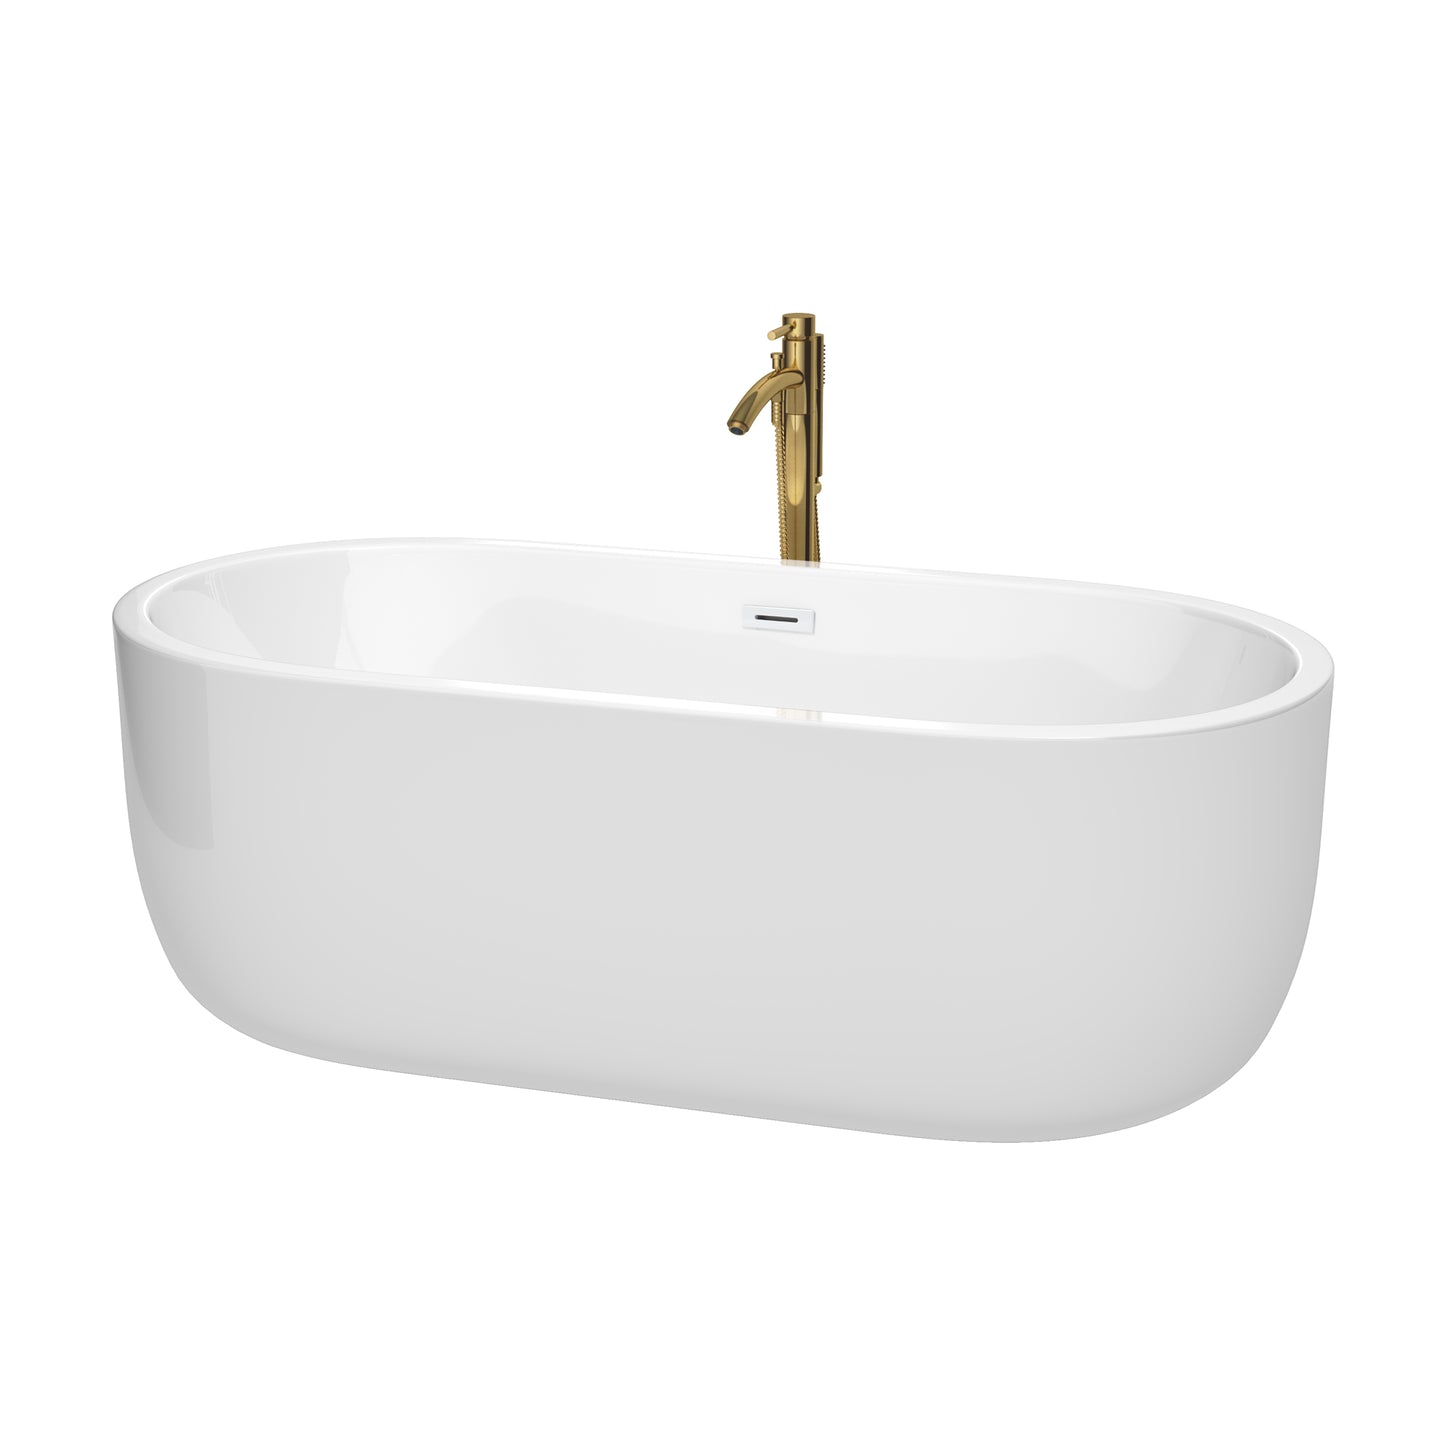 Wyndham Collection Juliette 67 Inch Freestanding Bathtub in White with Floor Mounted Faucet, Drain and Overflow Trim - Luxe Bathroom Vanities